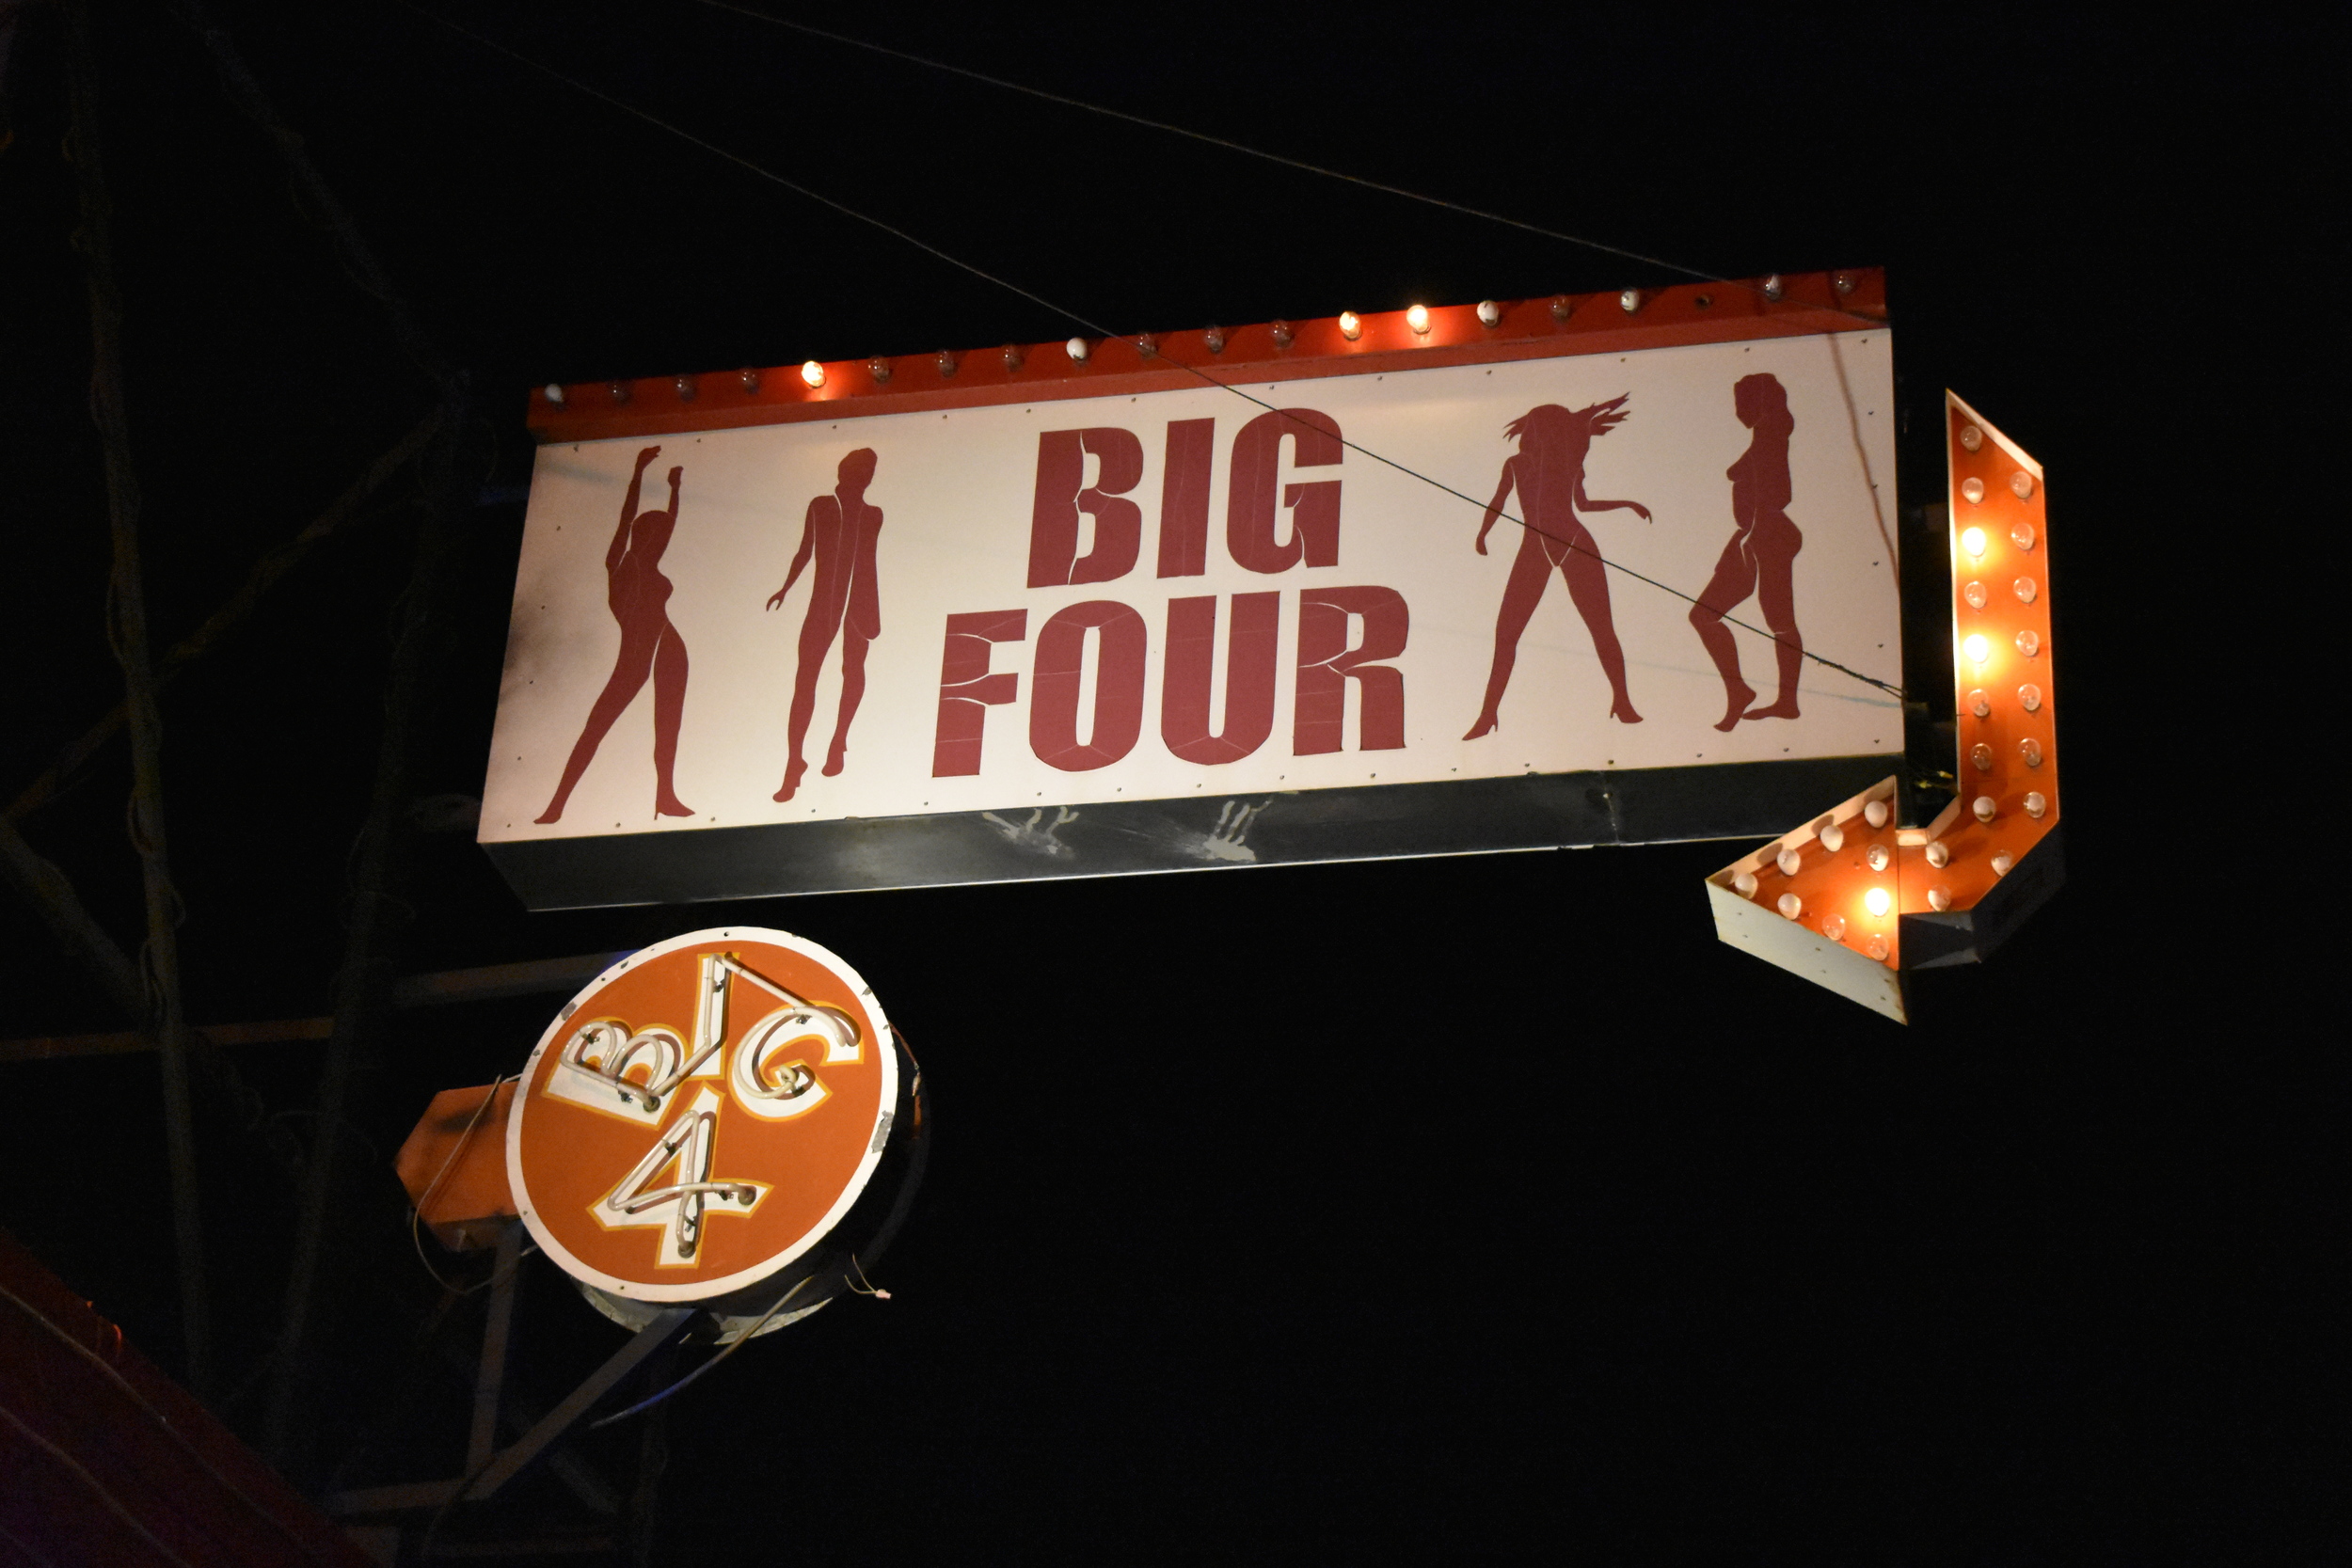 Big Four roof mounted sign, Ely, Nevada